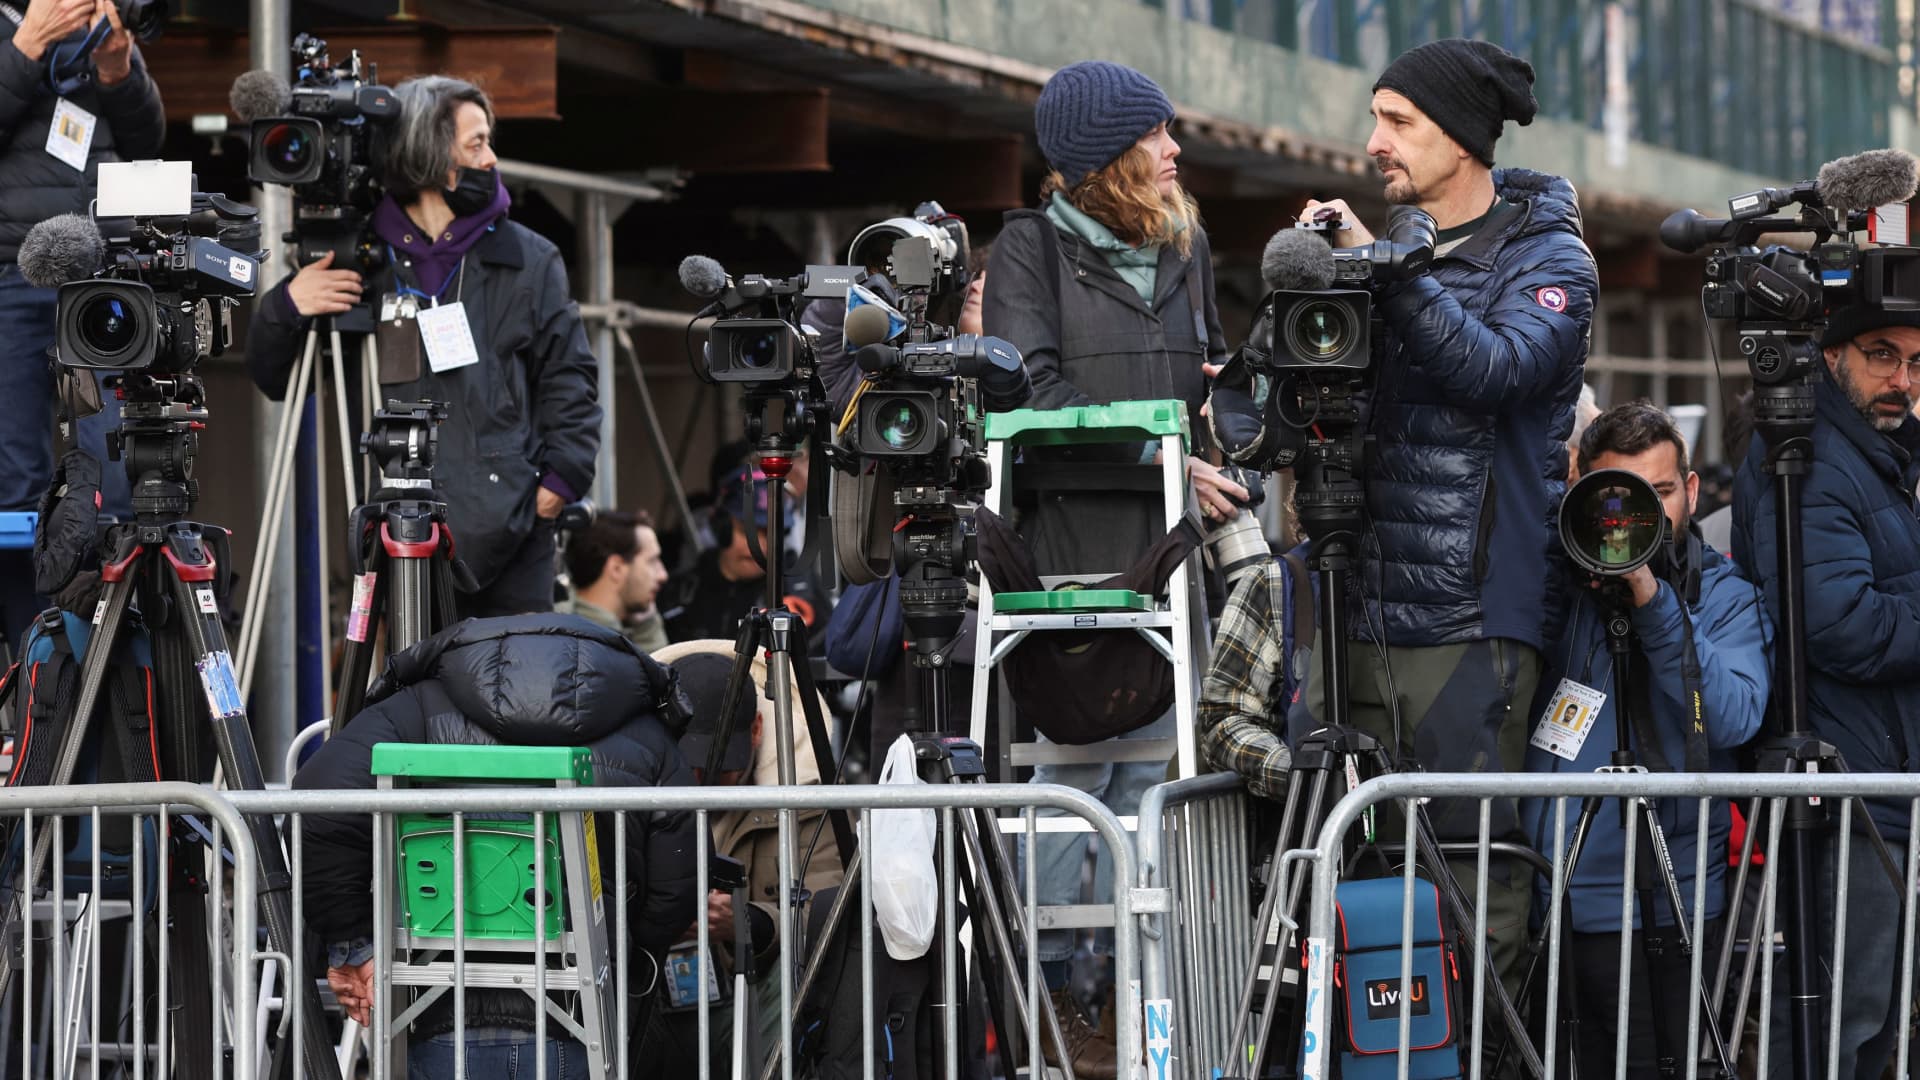 Members of the media wait at their positions outside Manhattan Criminal Courthouse, after Former U.S. President Donald Trump's indictment by a Manhattan grand jury following a probe into hush money paid to porn star Stormy Daniels, in New York City, U.S., April 4, 2023. 